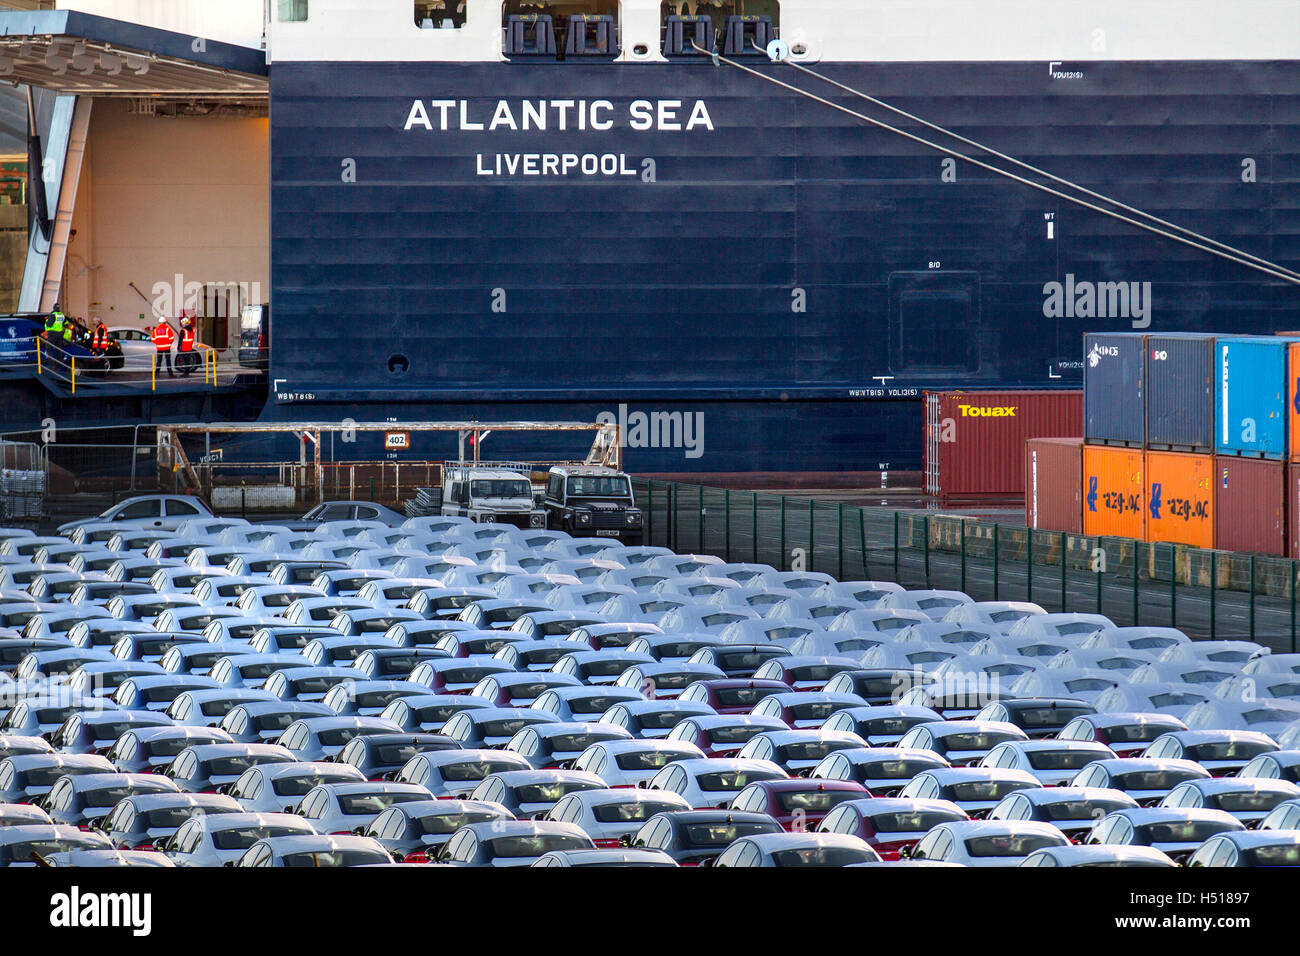 Cars waiting to be loaded at dock British car exports in Liverpool, Merseyside, UK October, 2016.  The new Atlantic Container Line (ACL) vessel Atlantic Sea arrives in Seaforth where dock cranes are undertaking loading and unloading at dusk, of cars under wraps. The ship is one of five new container vessels that will double ACL’s capacity to carry cars & containers from the UK and Europe across the Atlantic. The Container Roll-On/Roll-Off ships are the world’s largest and most advanced vessels of their kind. The Princess Royal will christen the new vessel ‘Atlantic Sea’ Stock Photo